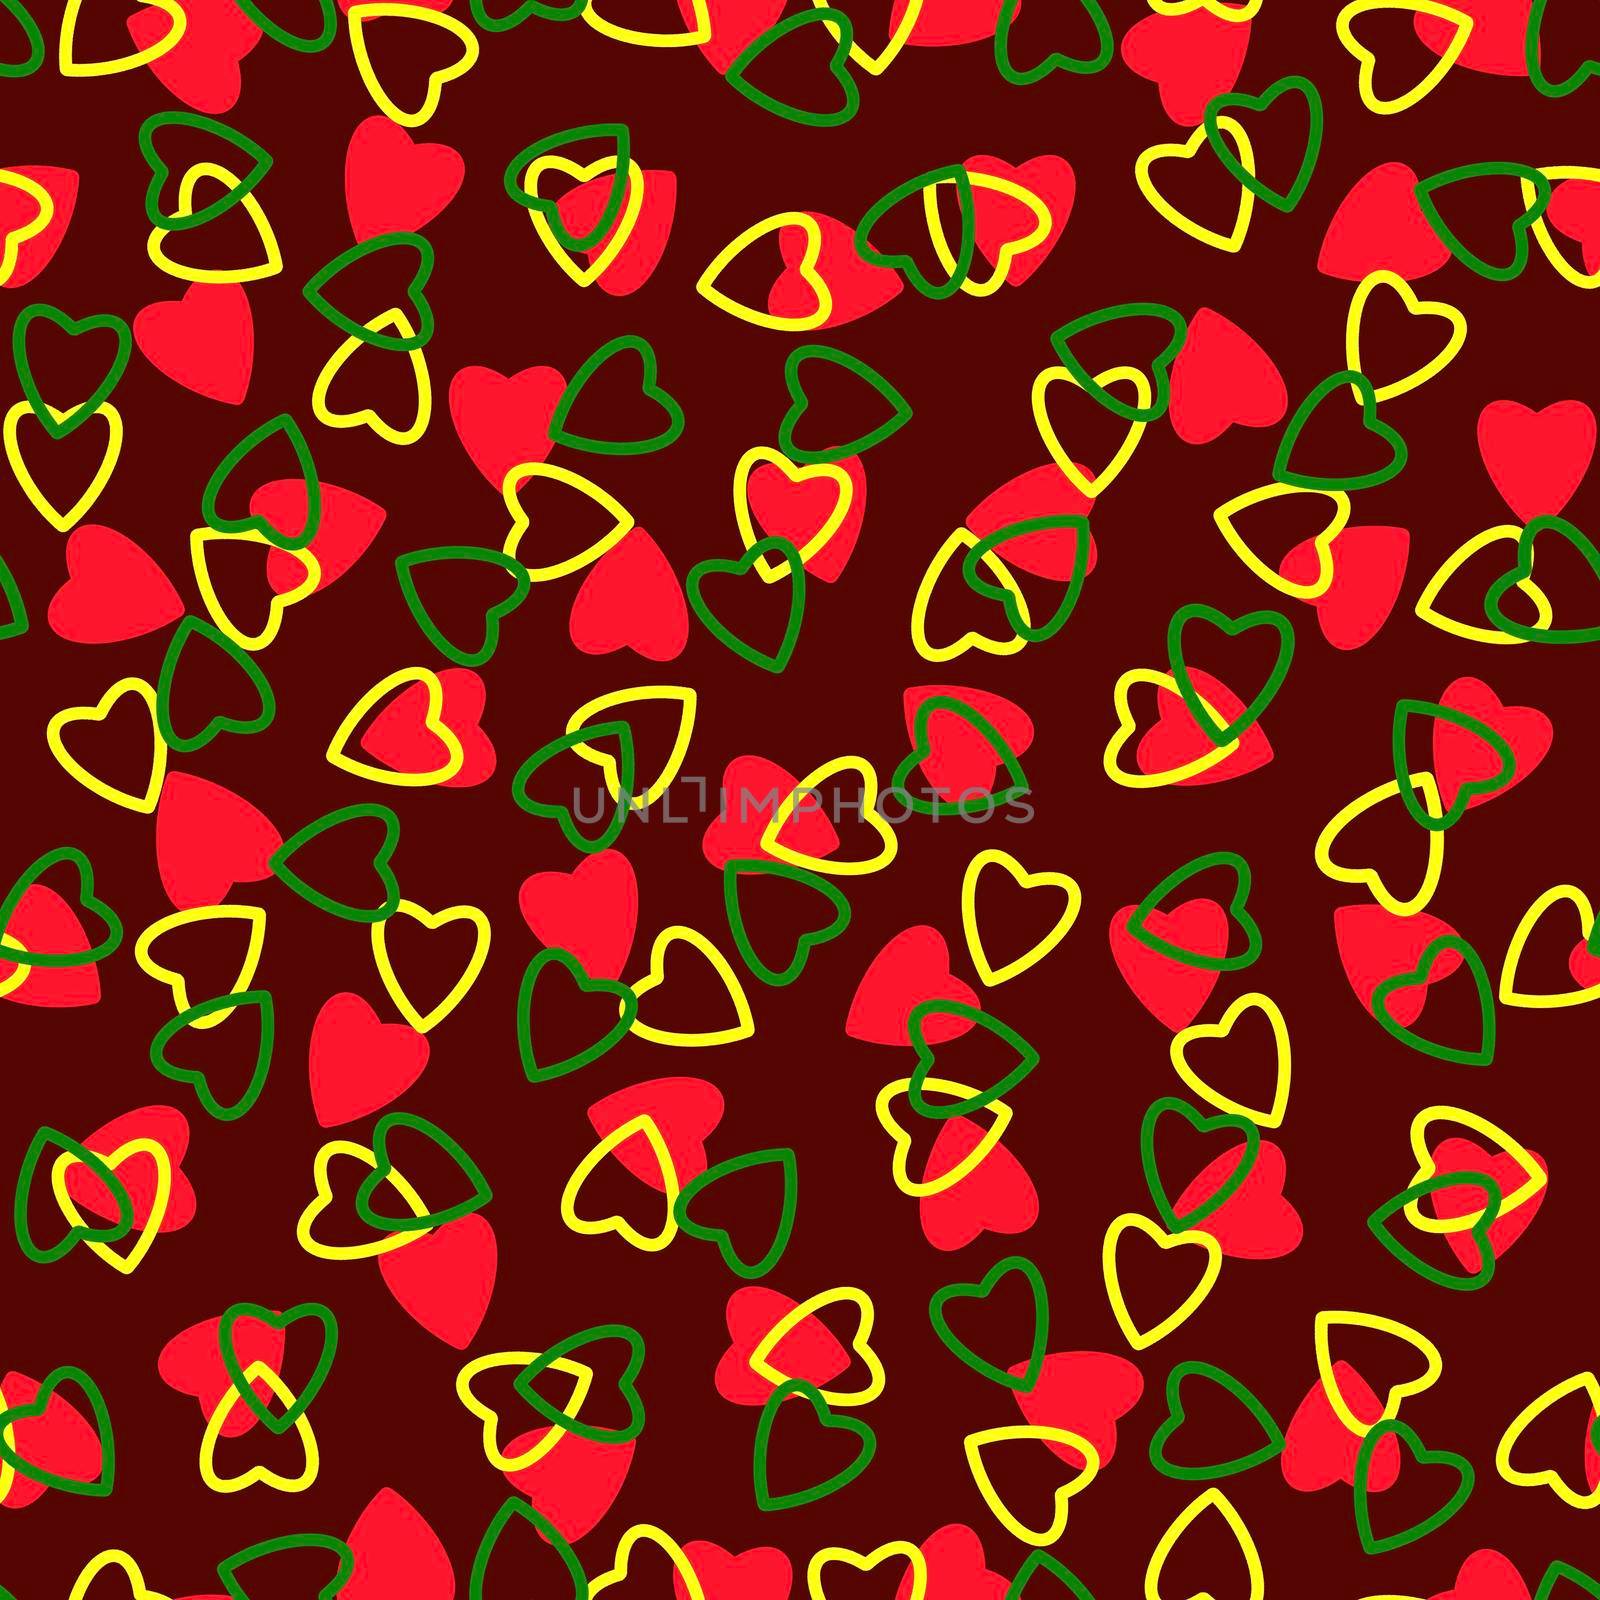 Simple hearts seamless pattern,endless chaotic texture made tiny heart silhouettes.Valentines,mothers day background.Great for Easter,wedding,scrapbook,gift wrapping paper,textiles.Yellow,red,burgundy by Angelsmoon